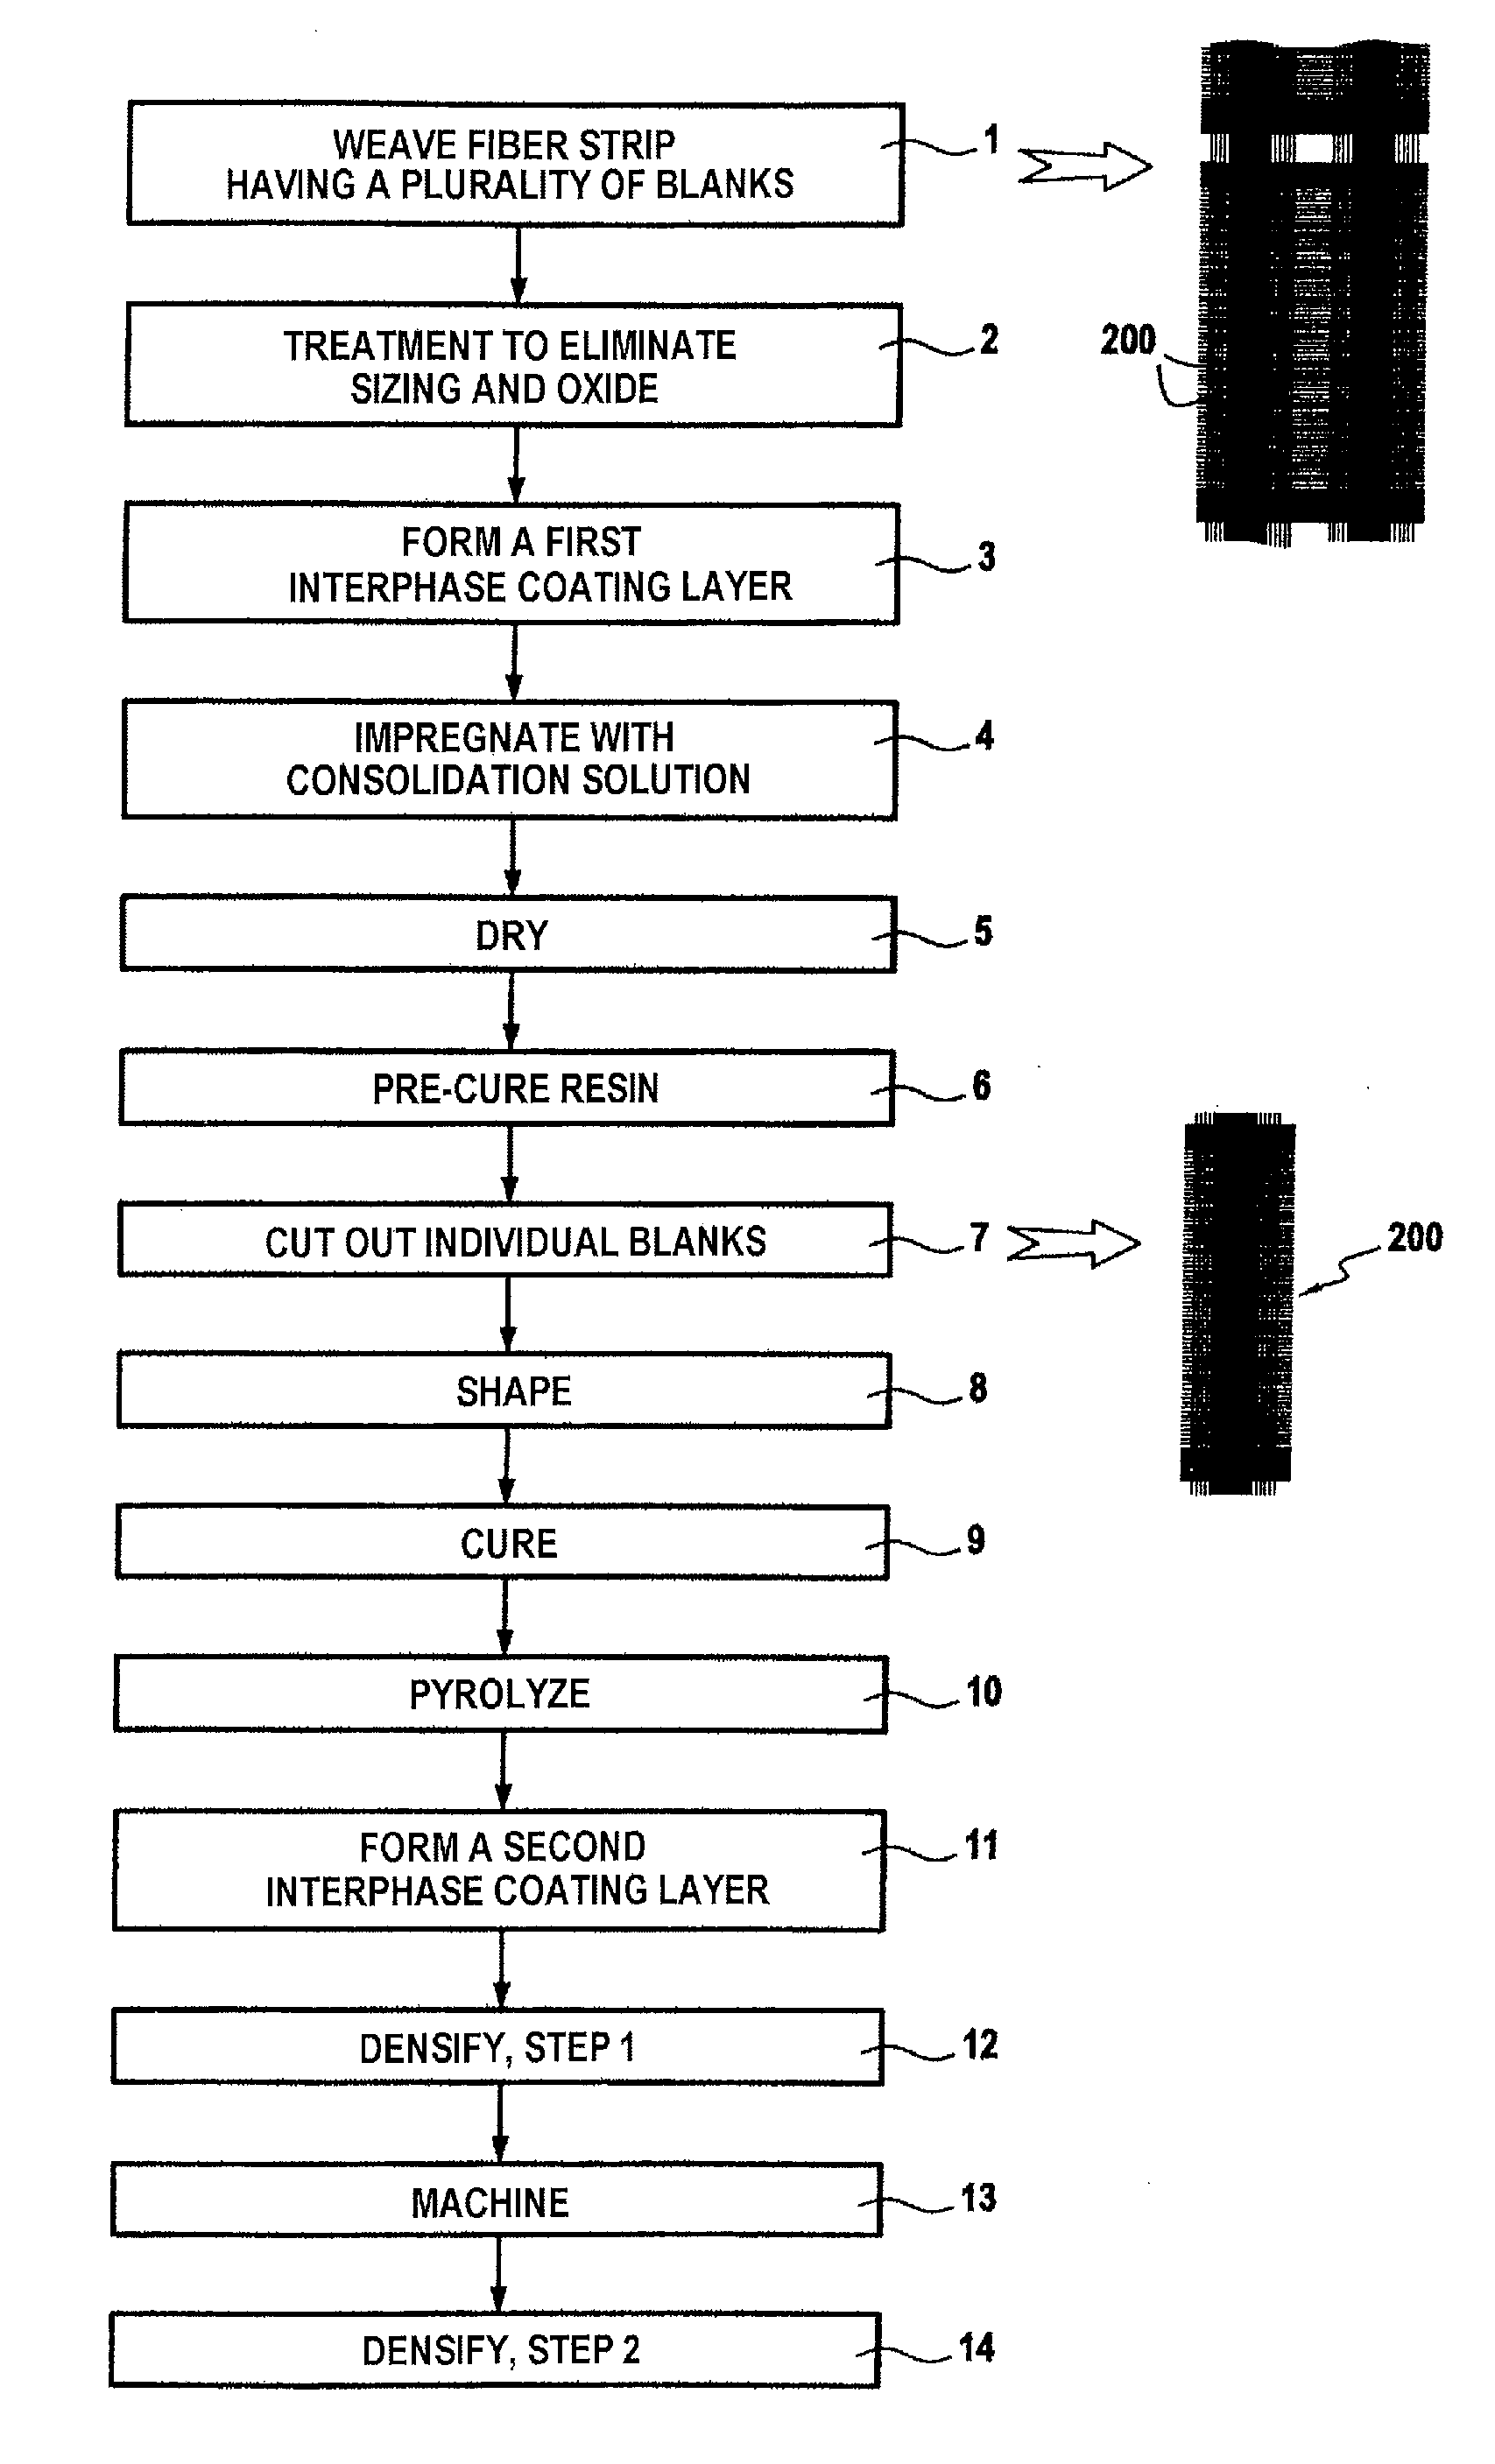 Method for manufacturing a complexly shaped composite material part